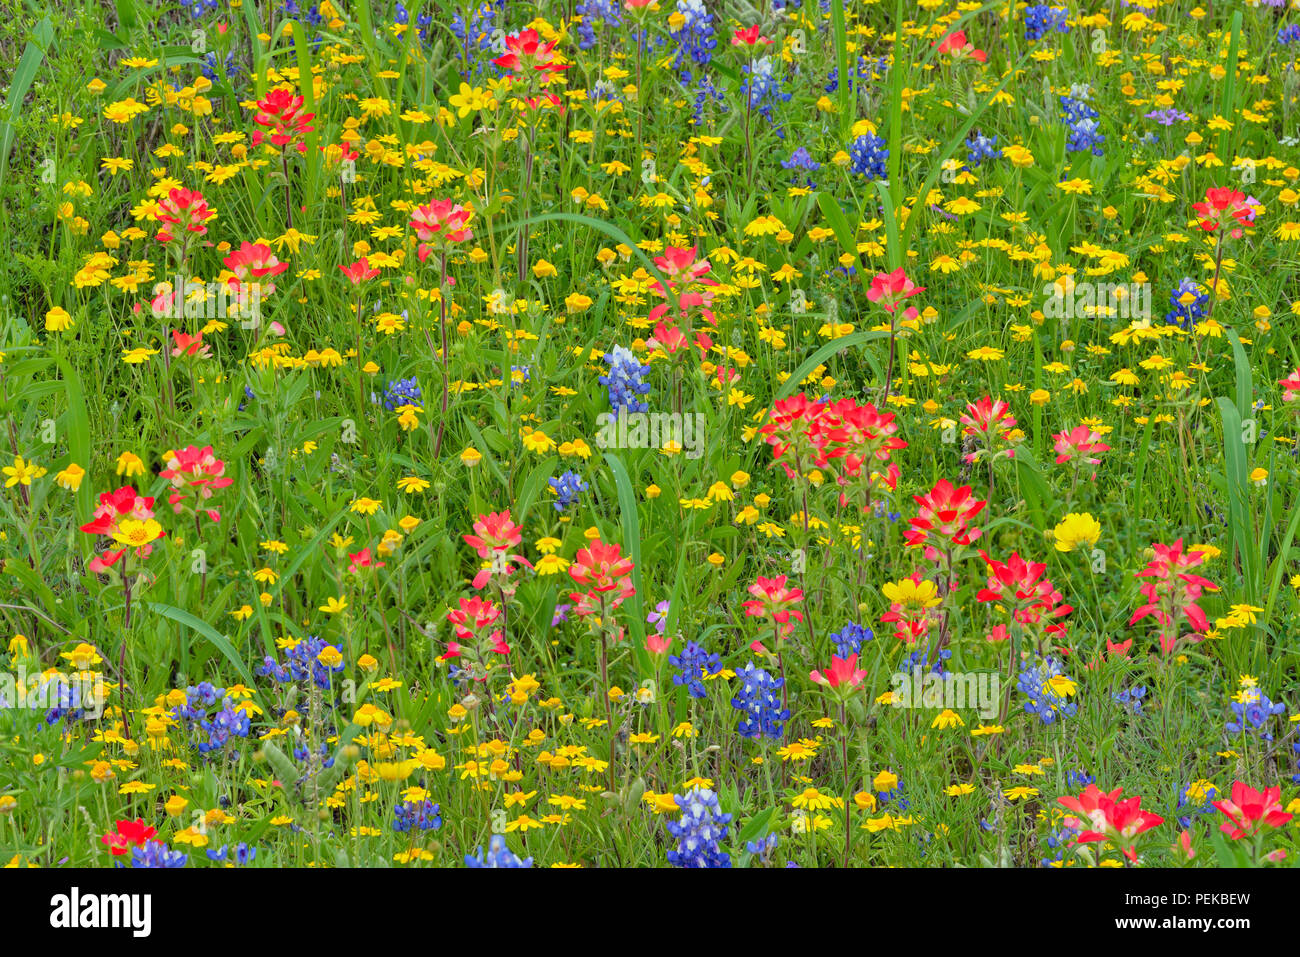 Roadside wildflowers in bloom- Texas paintbrush, bluebonnets and daisies, Burnet County, Texas, USA Stock Photo